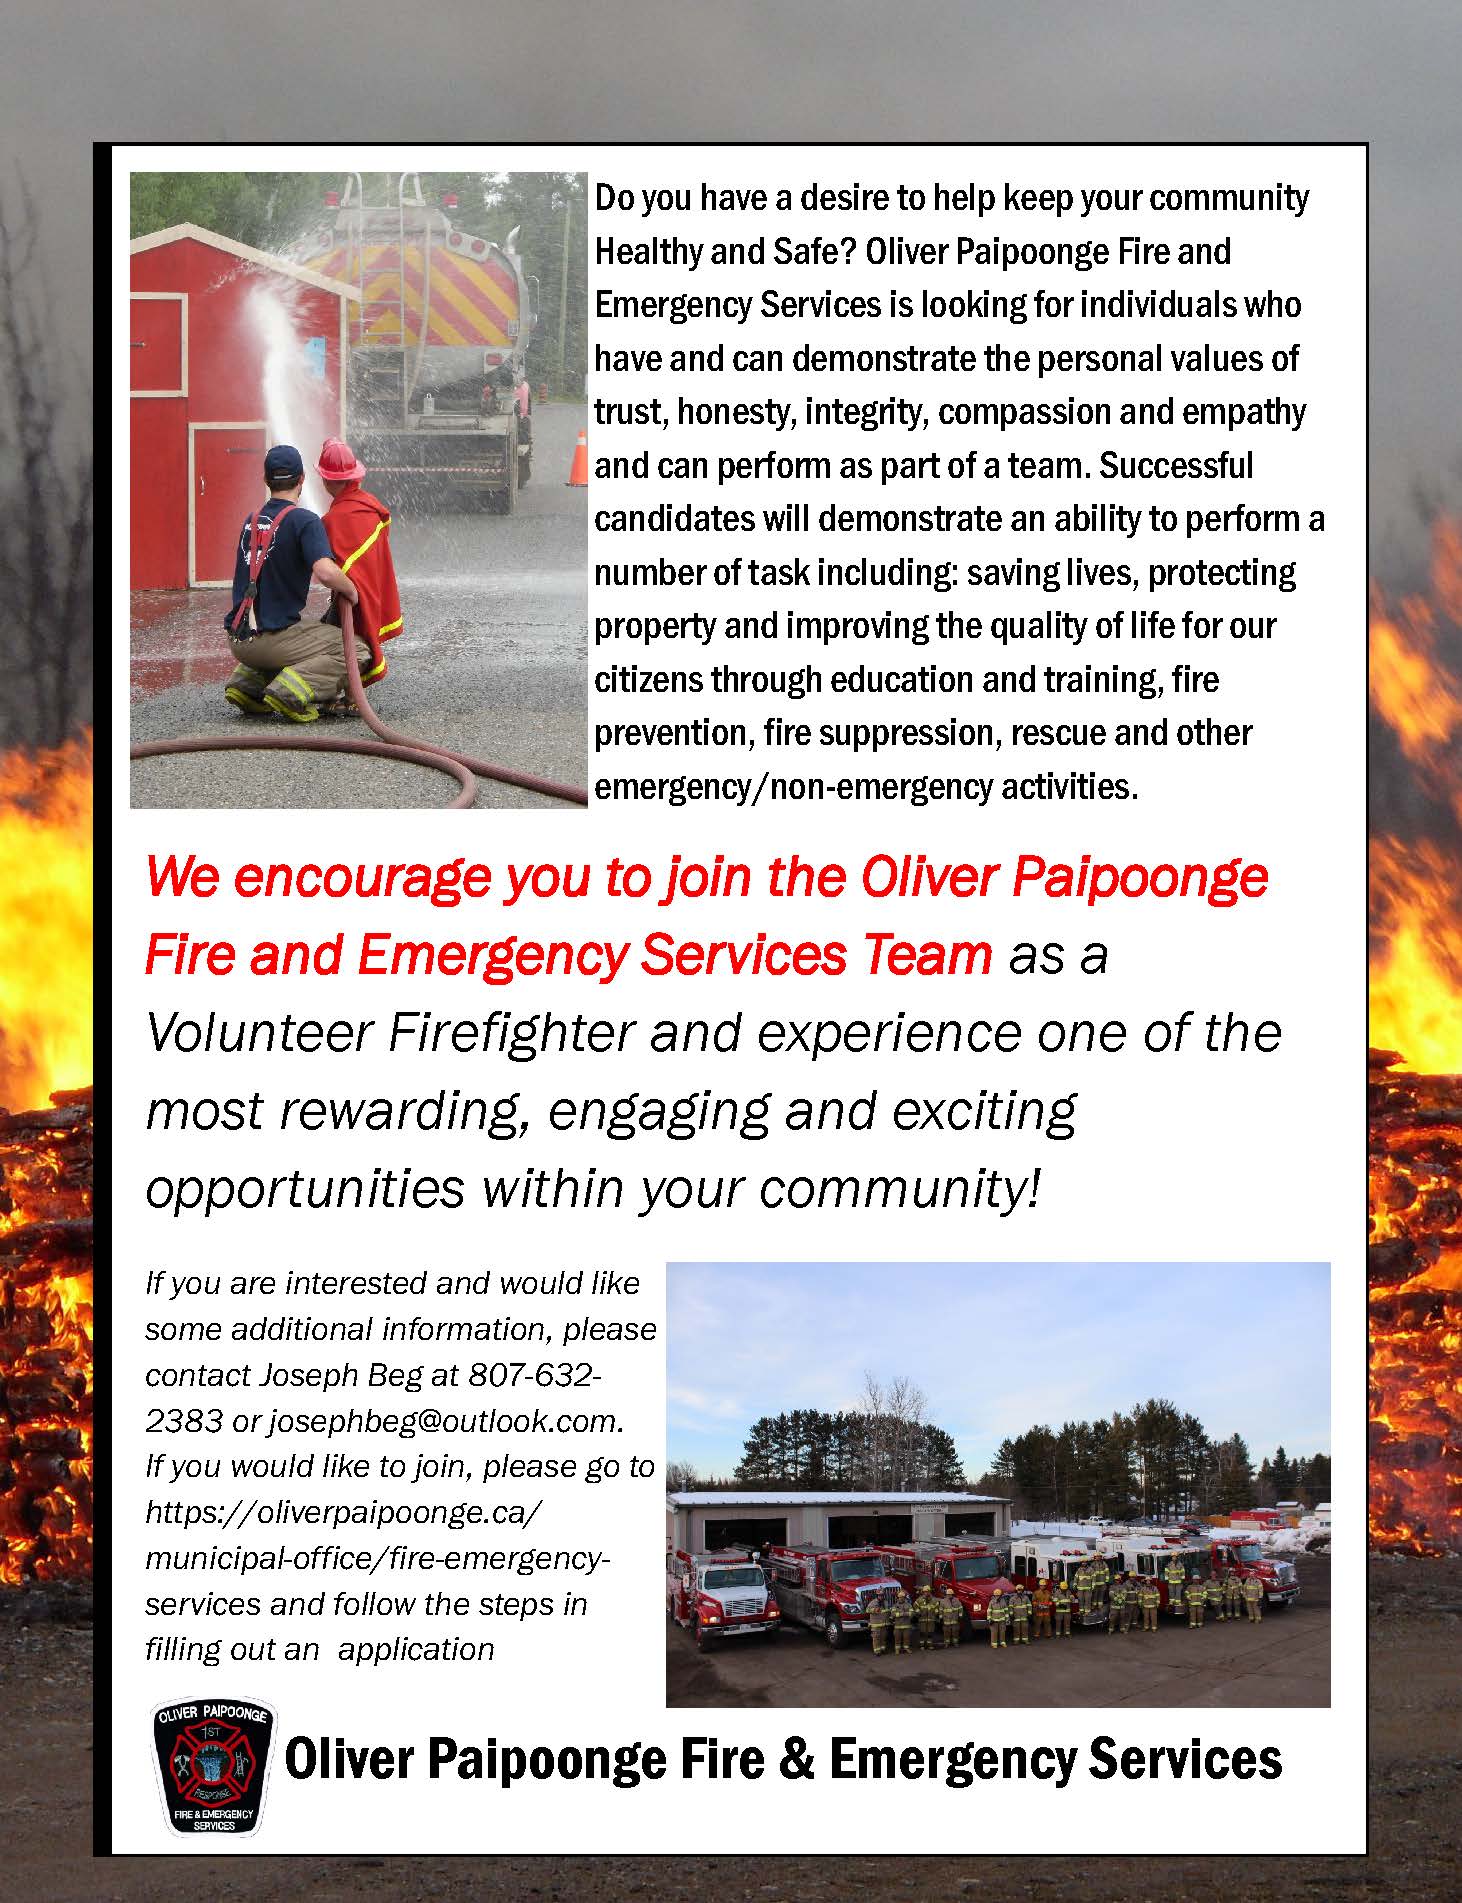 We encourage you to join the Oliver Paipoonge Fire and Emergency Services team